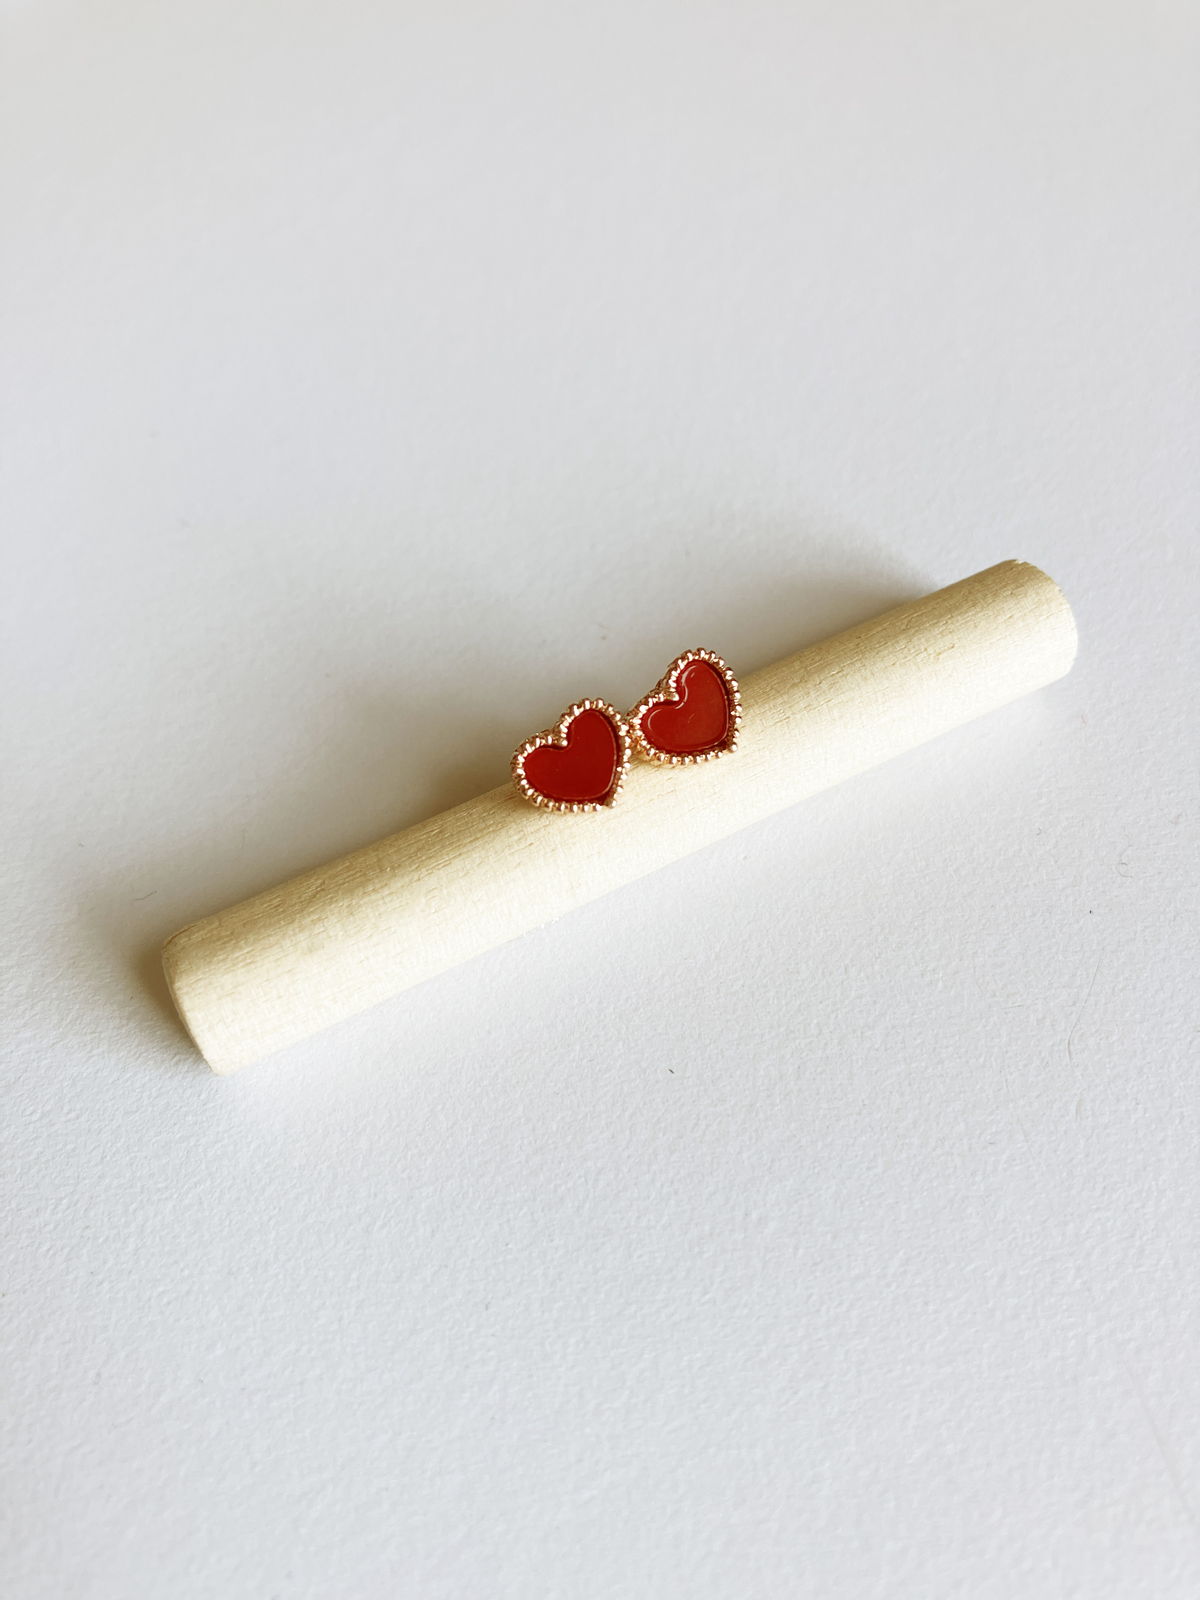 Primary image for Bisous Heart Earrings in Rose Gold and Carnelian